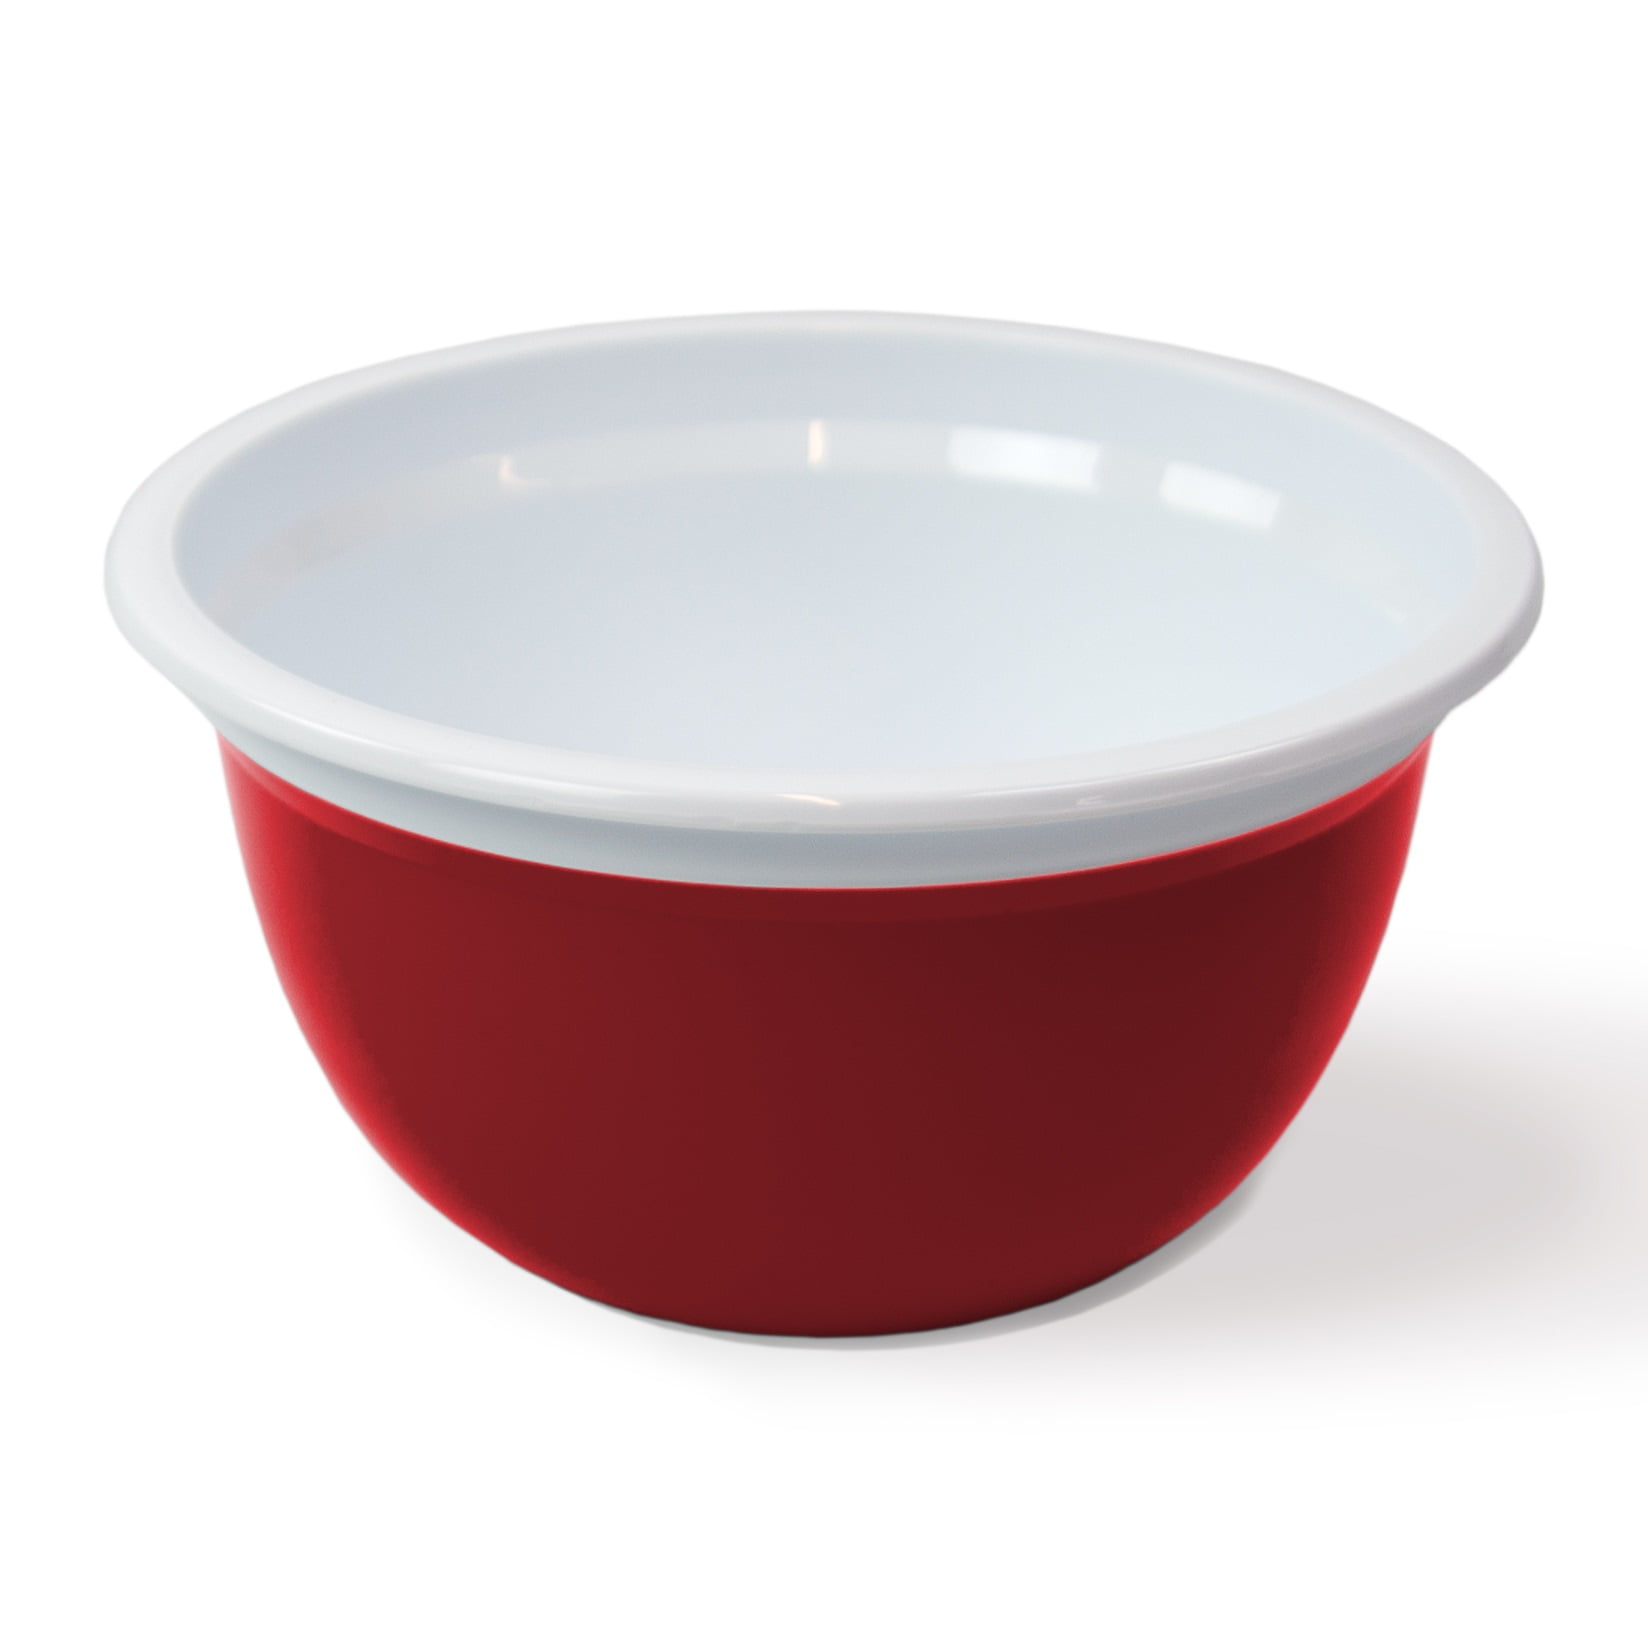 Mainstays SS 5QT Multi-Use Mixing Bowl for Prepping, Serving or Storage